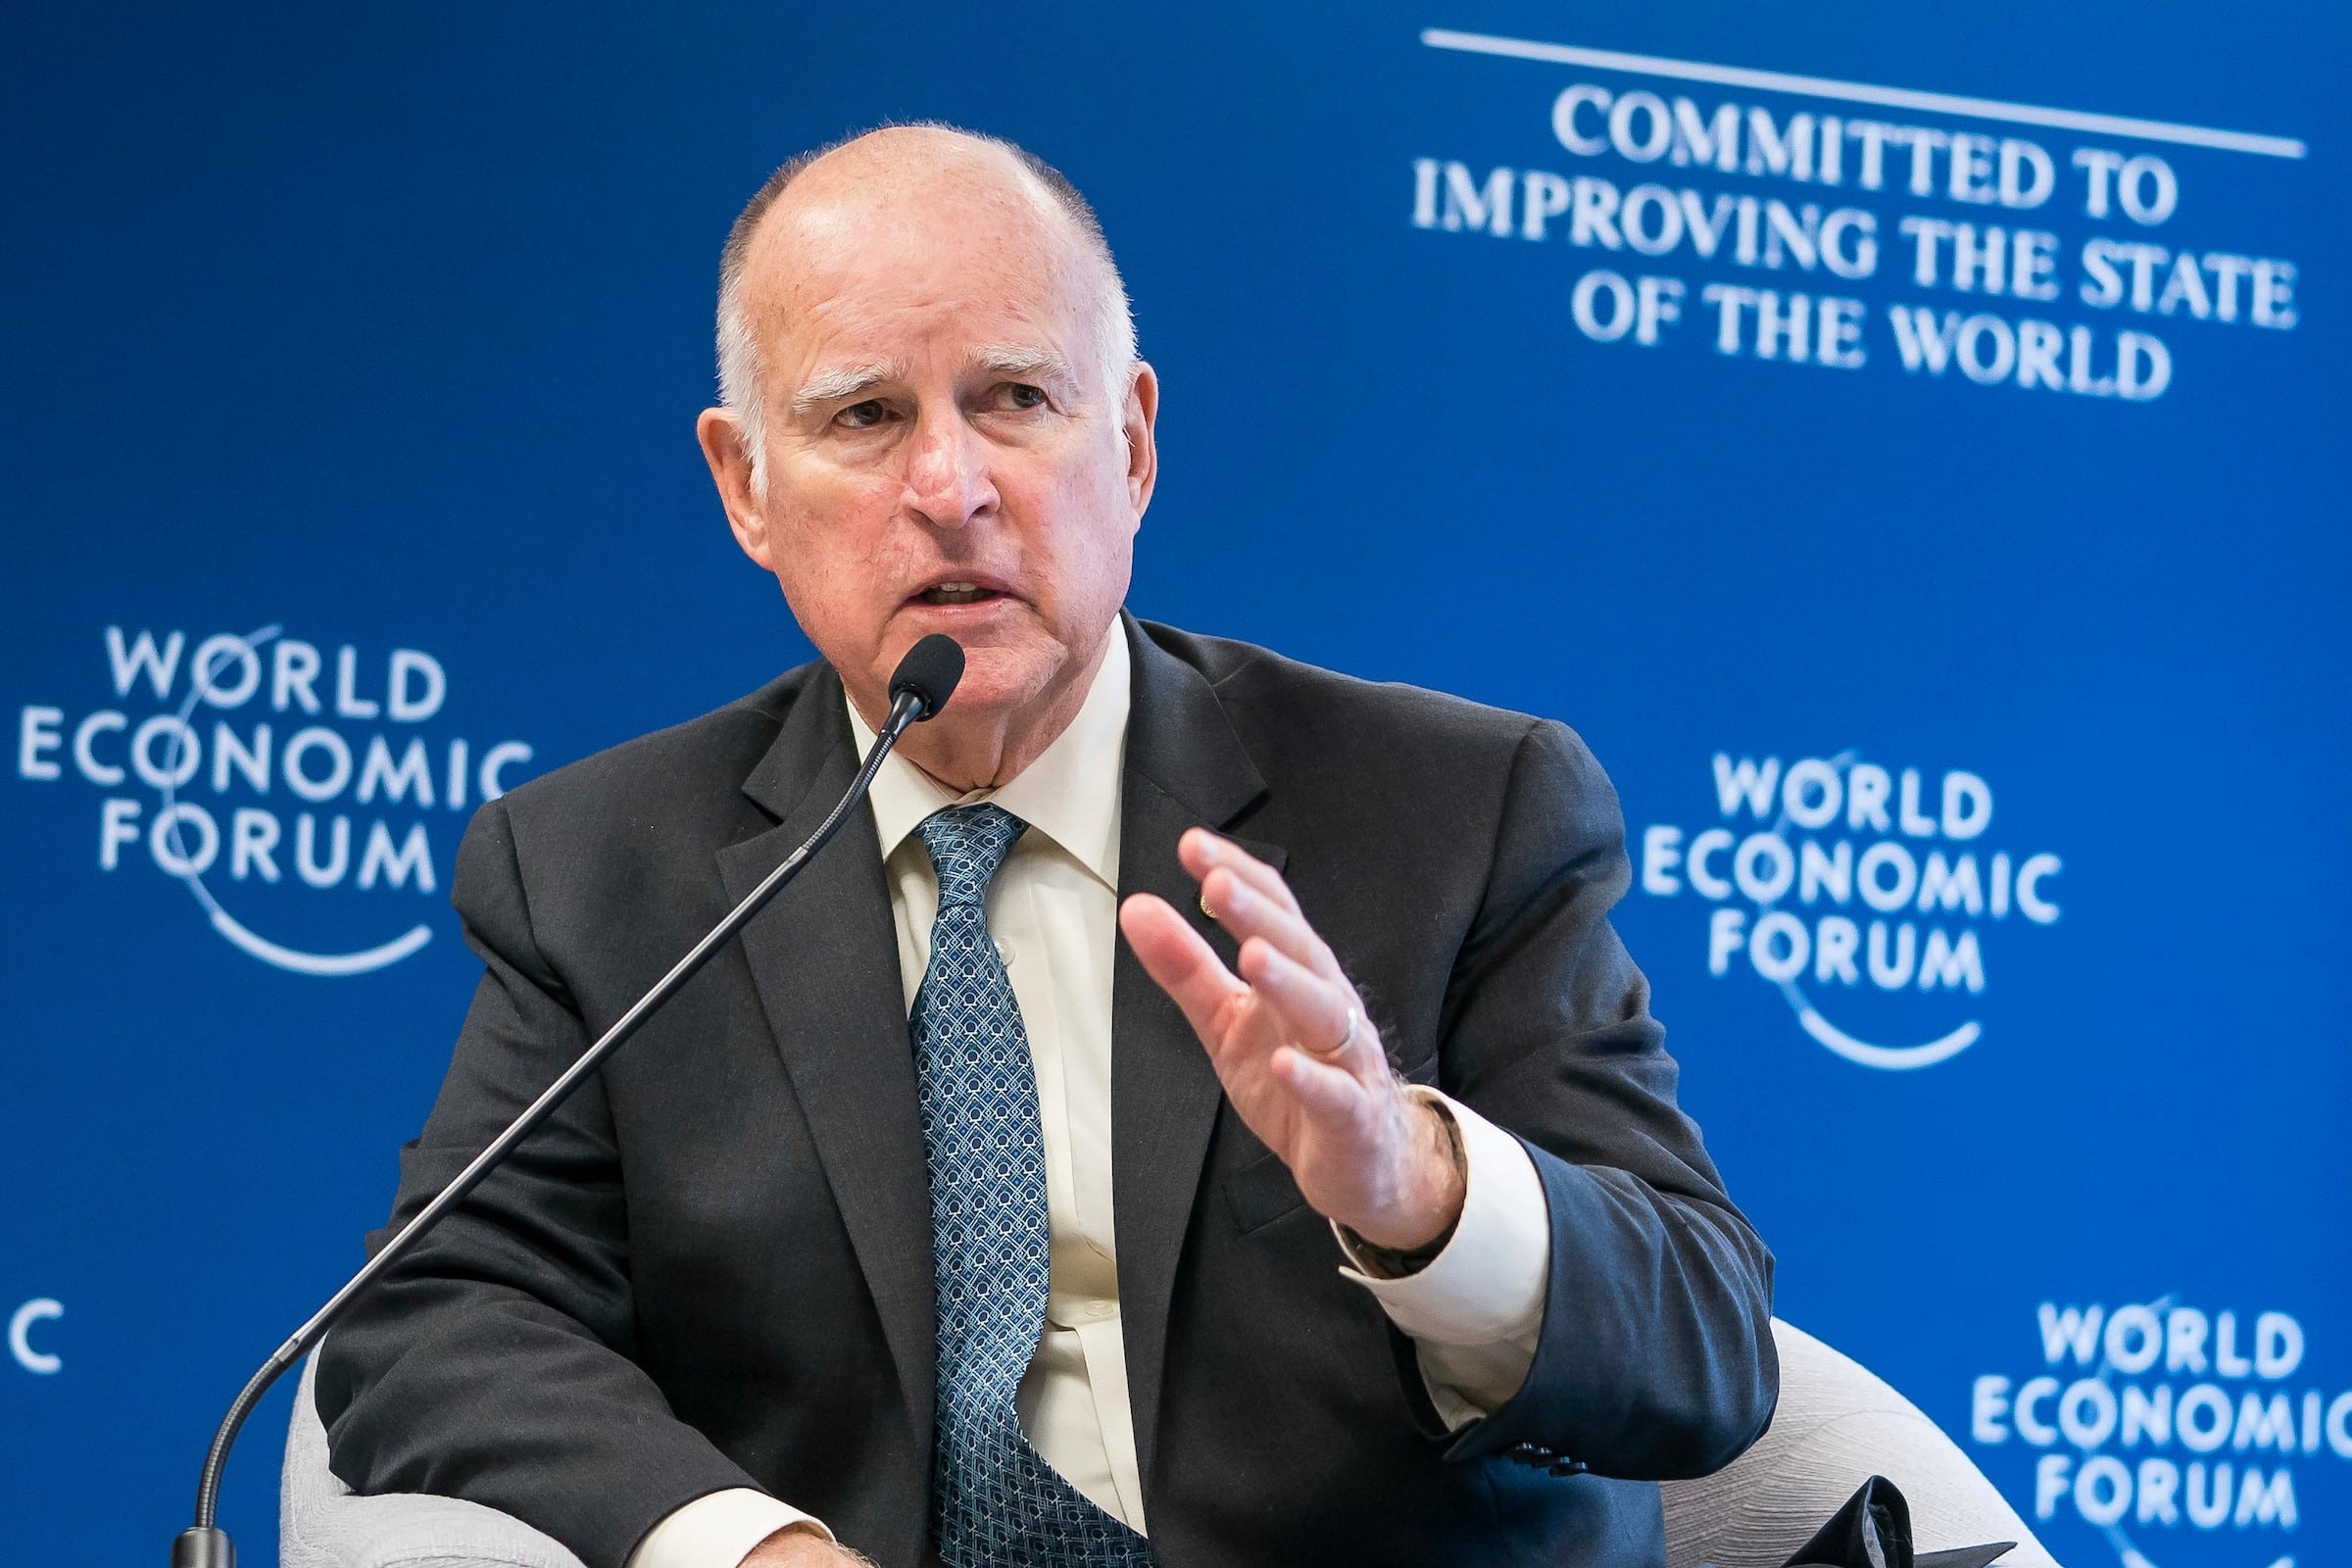 Governor Brown at World Economic Forum Summit: “Climate Change Does Not Recognize Sovereignty”